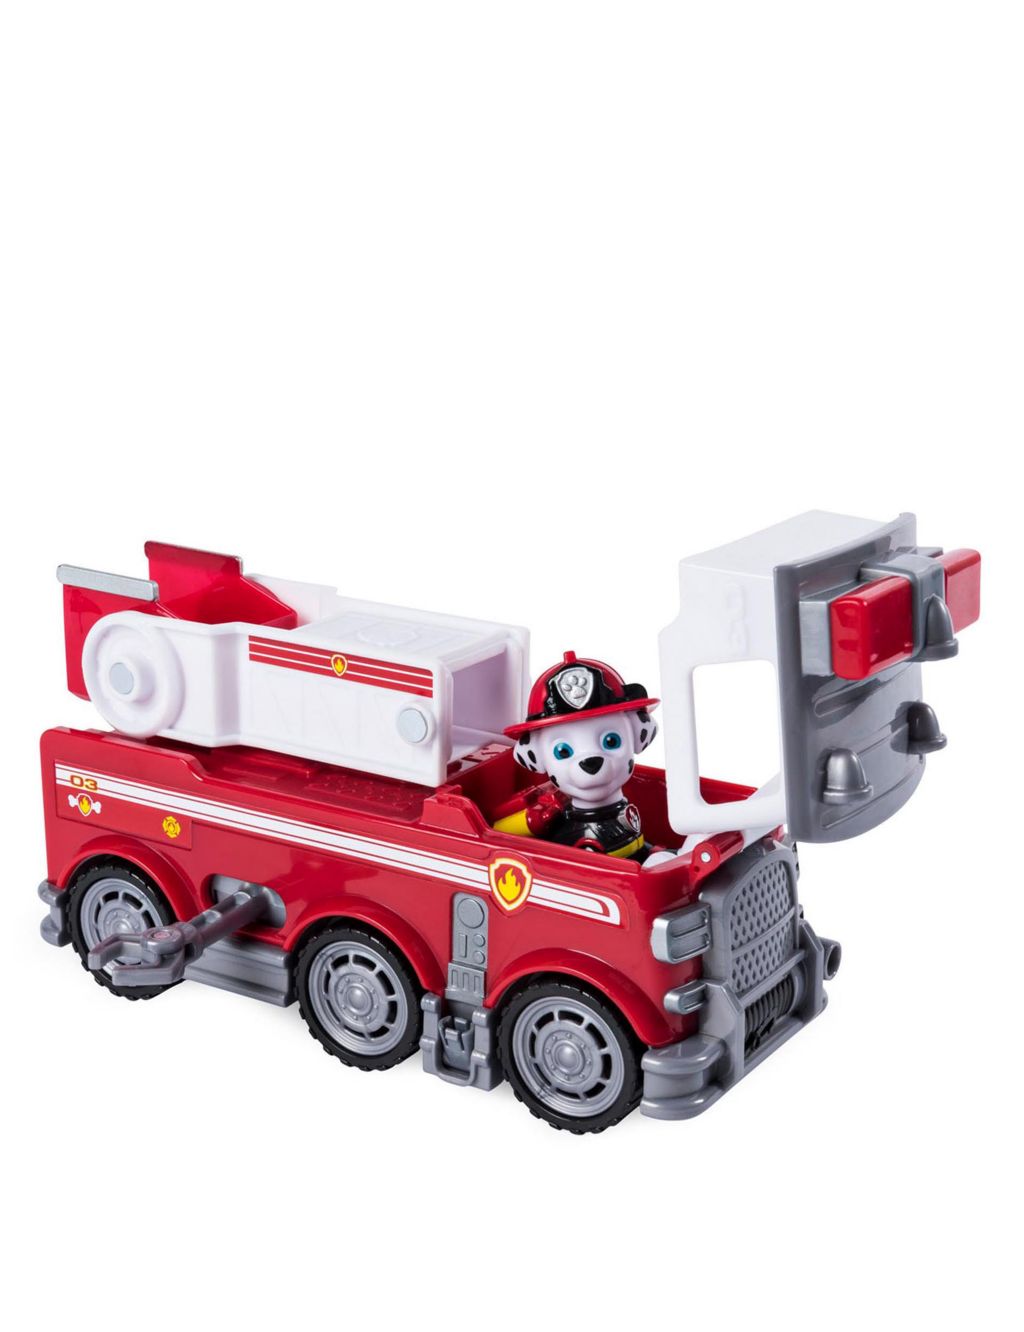 Rescue Fire Truck (3+ Yrs) image 2